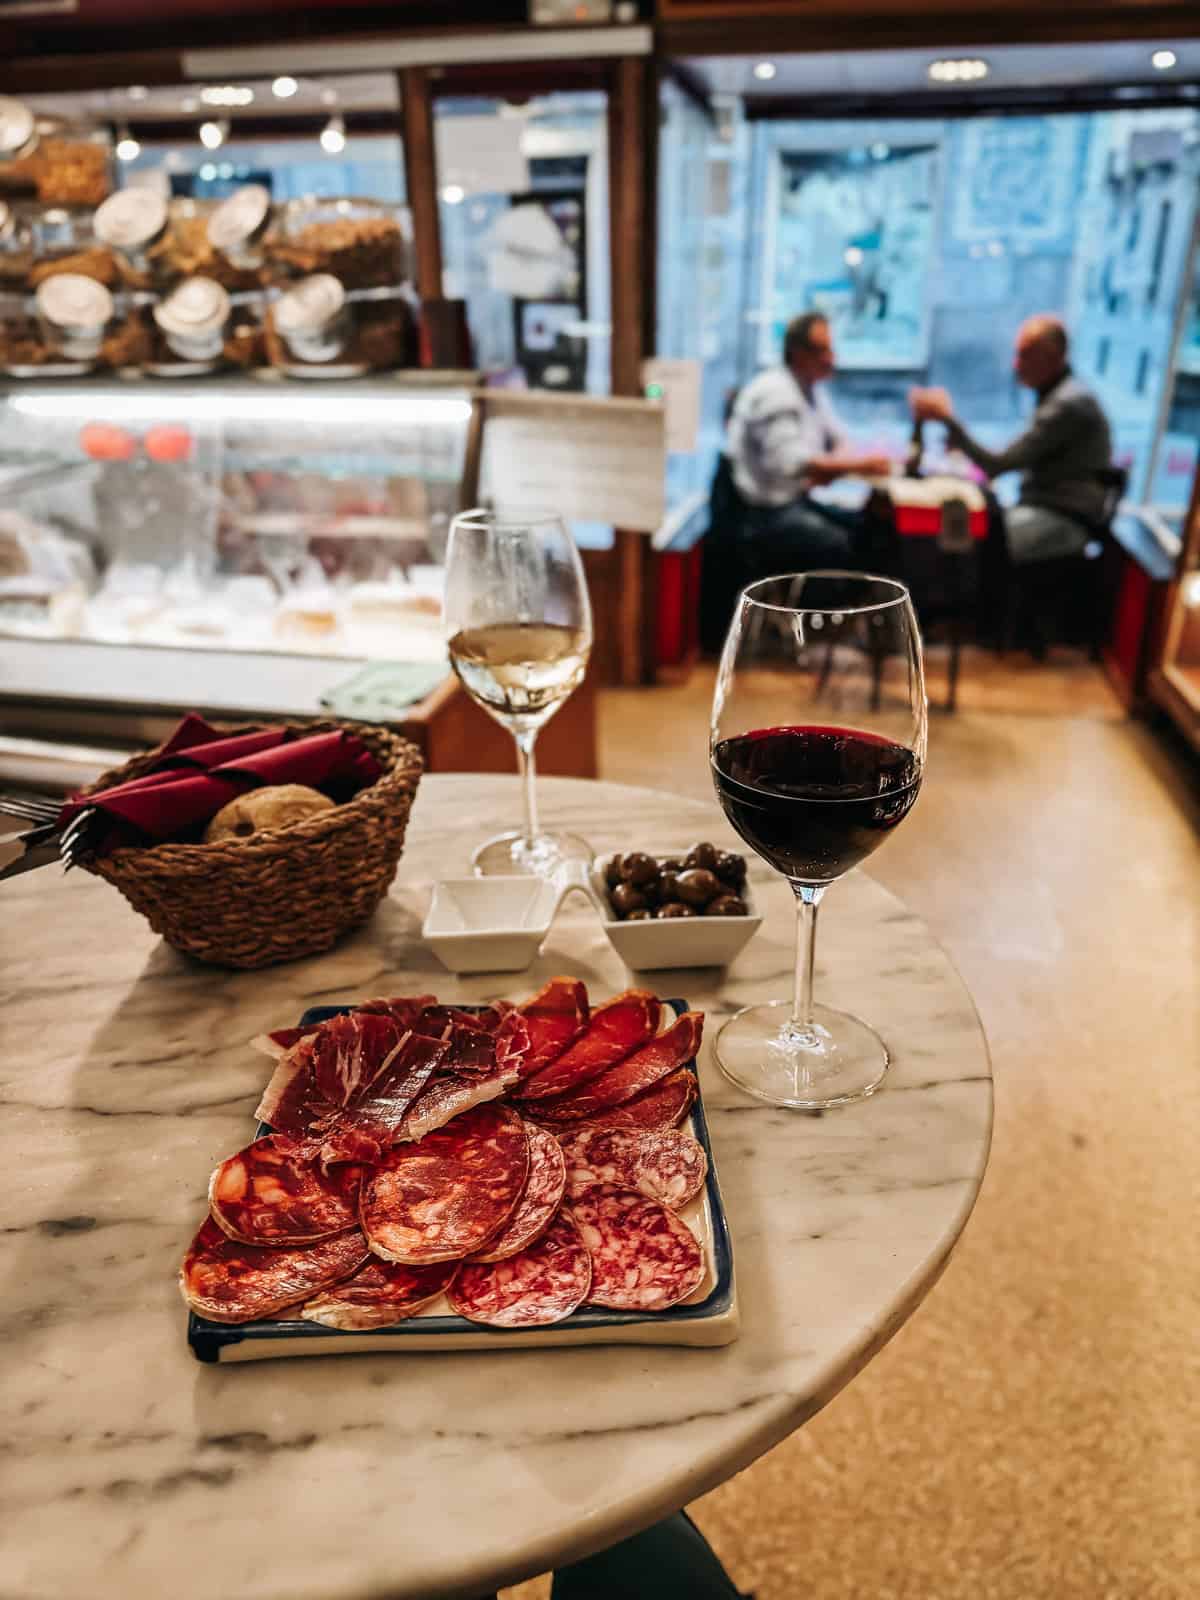 A charcuterie plate and 2 glasses of wine sit on a table